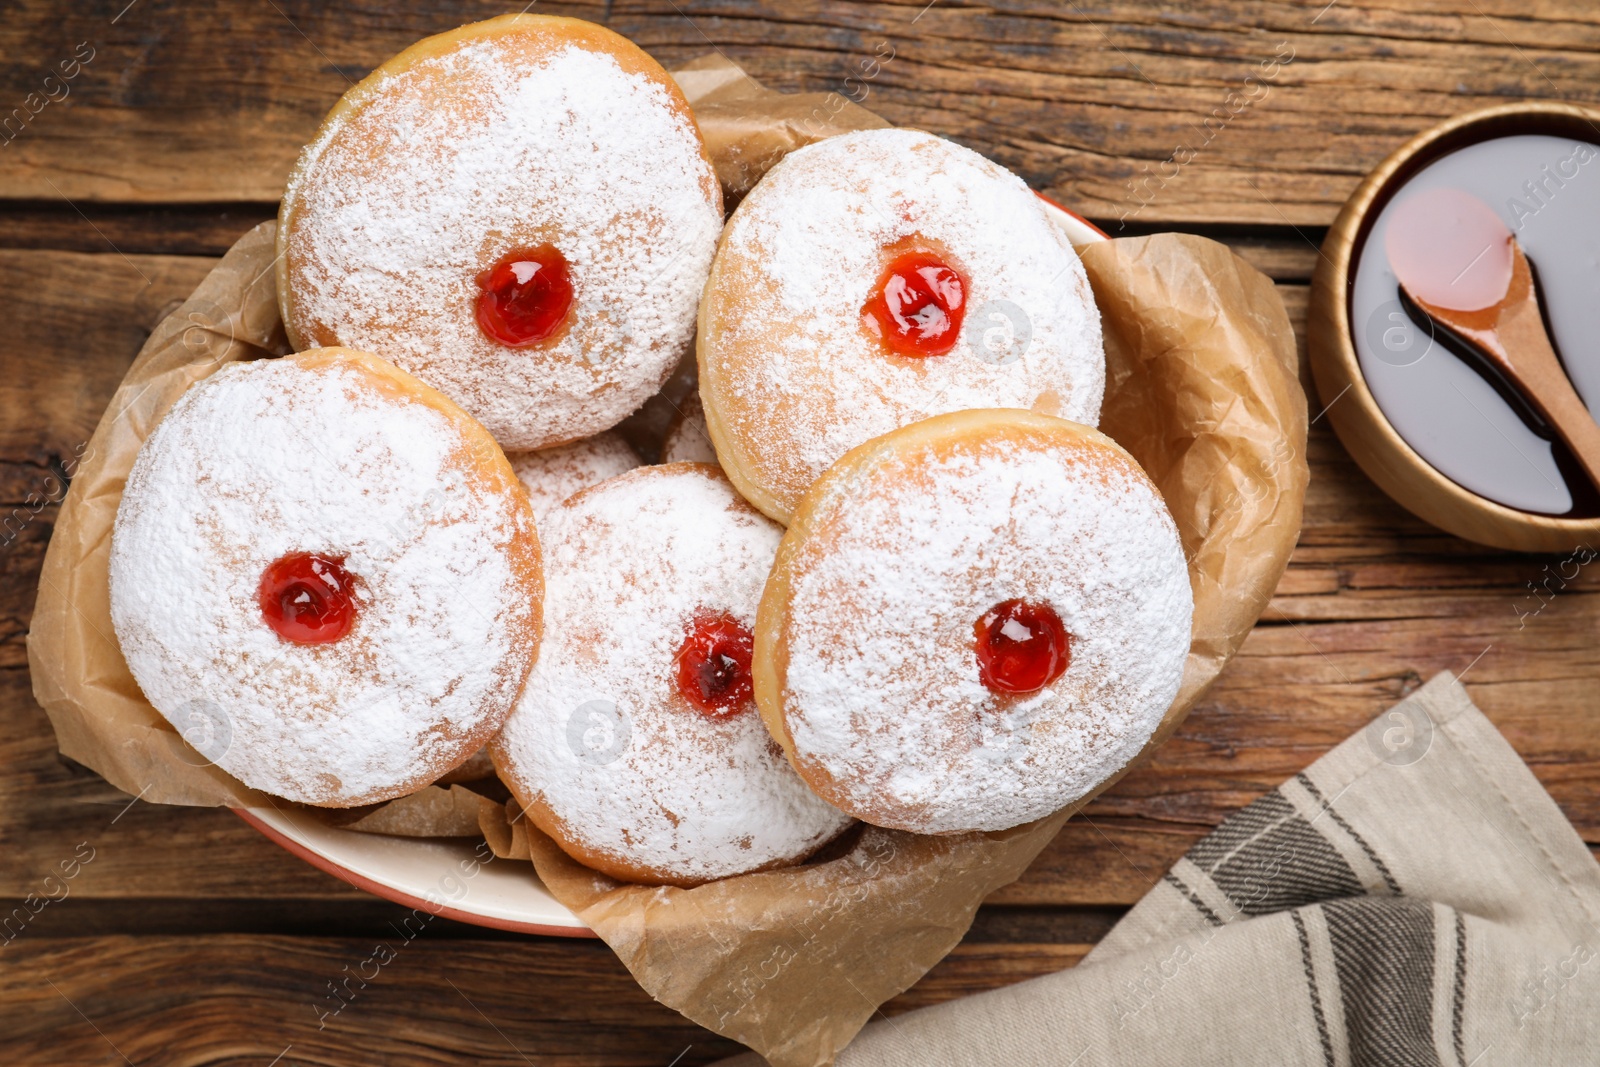 Photo of Delicious donuts with jelly and powdered sugar in baking dish on wooden table, flat lay